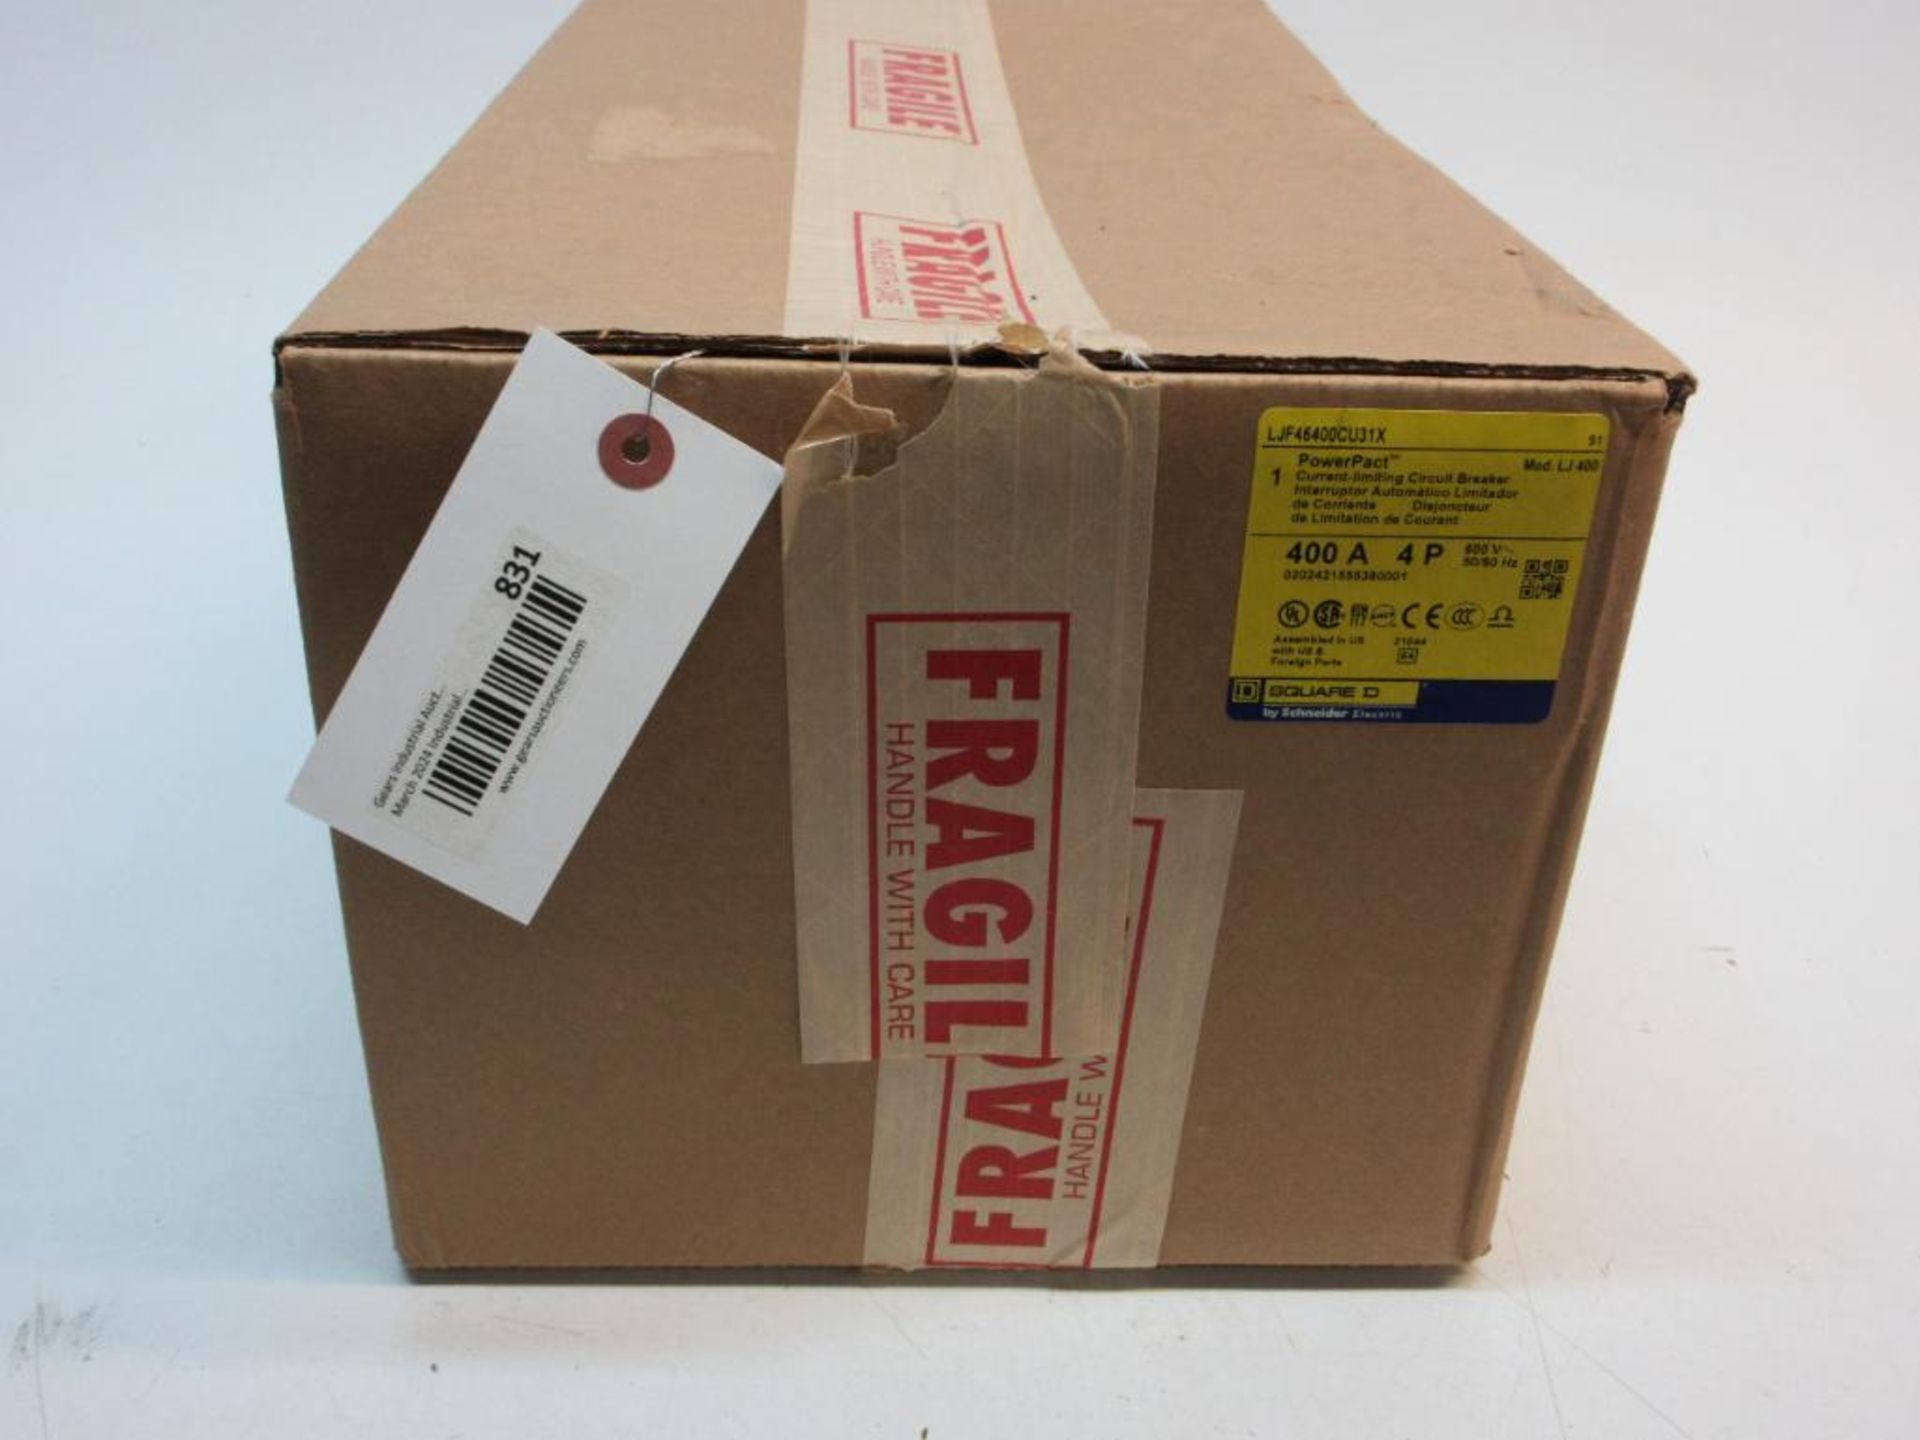 SQUARE D LJF46400CU31X POWERPACT CURRENT LIMITING CIRCUIT BREAKER 400A 4 POLE MODEL LJ400 NEW IN BOX